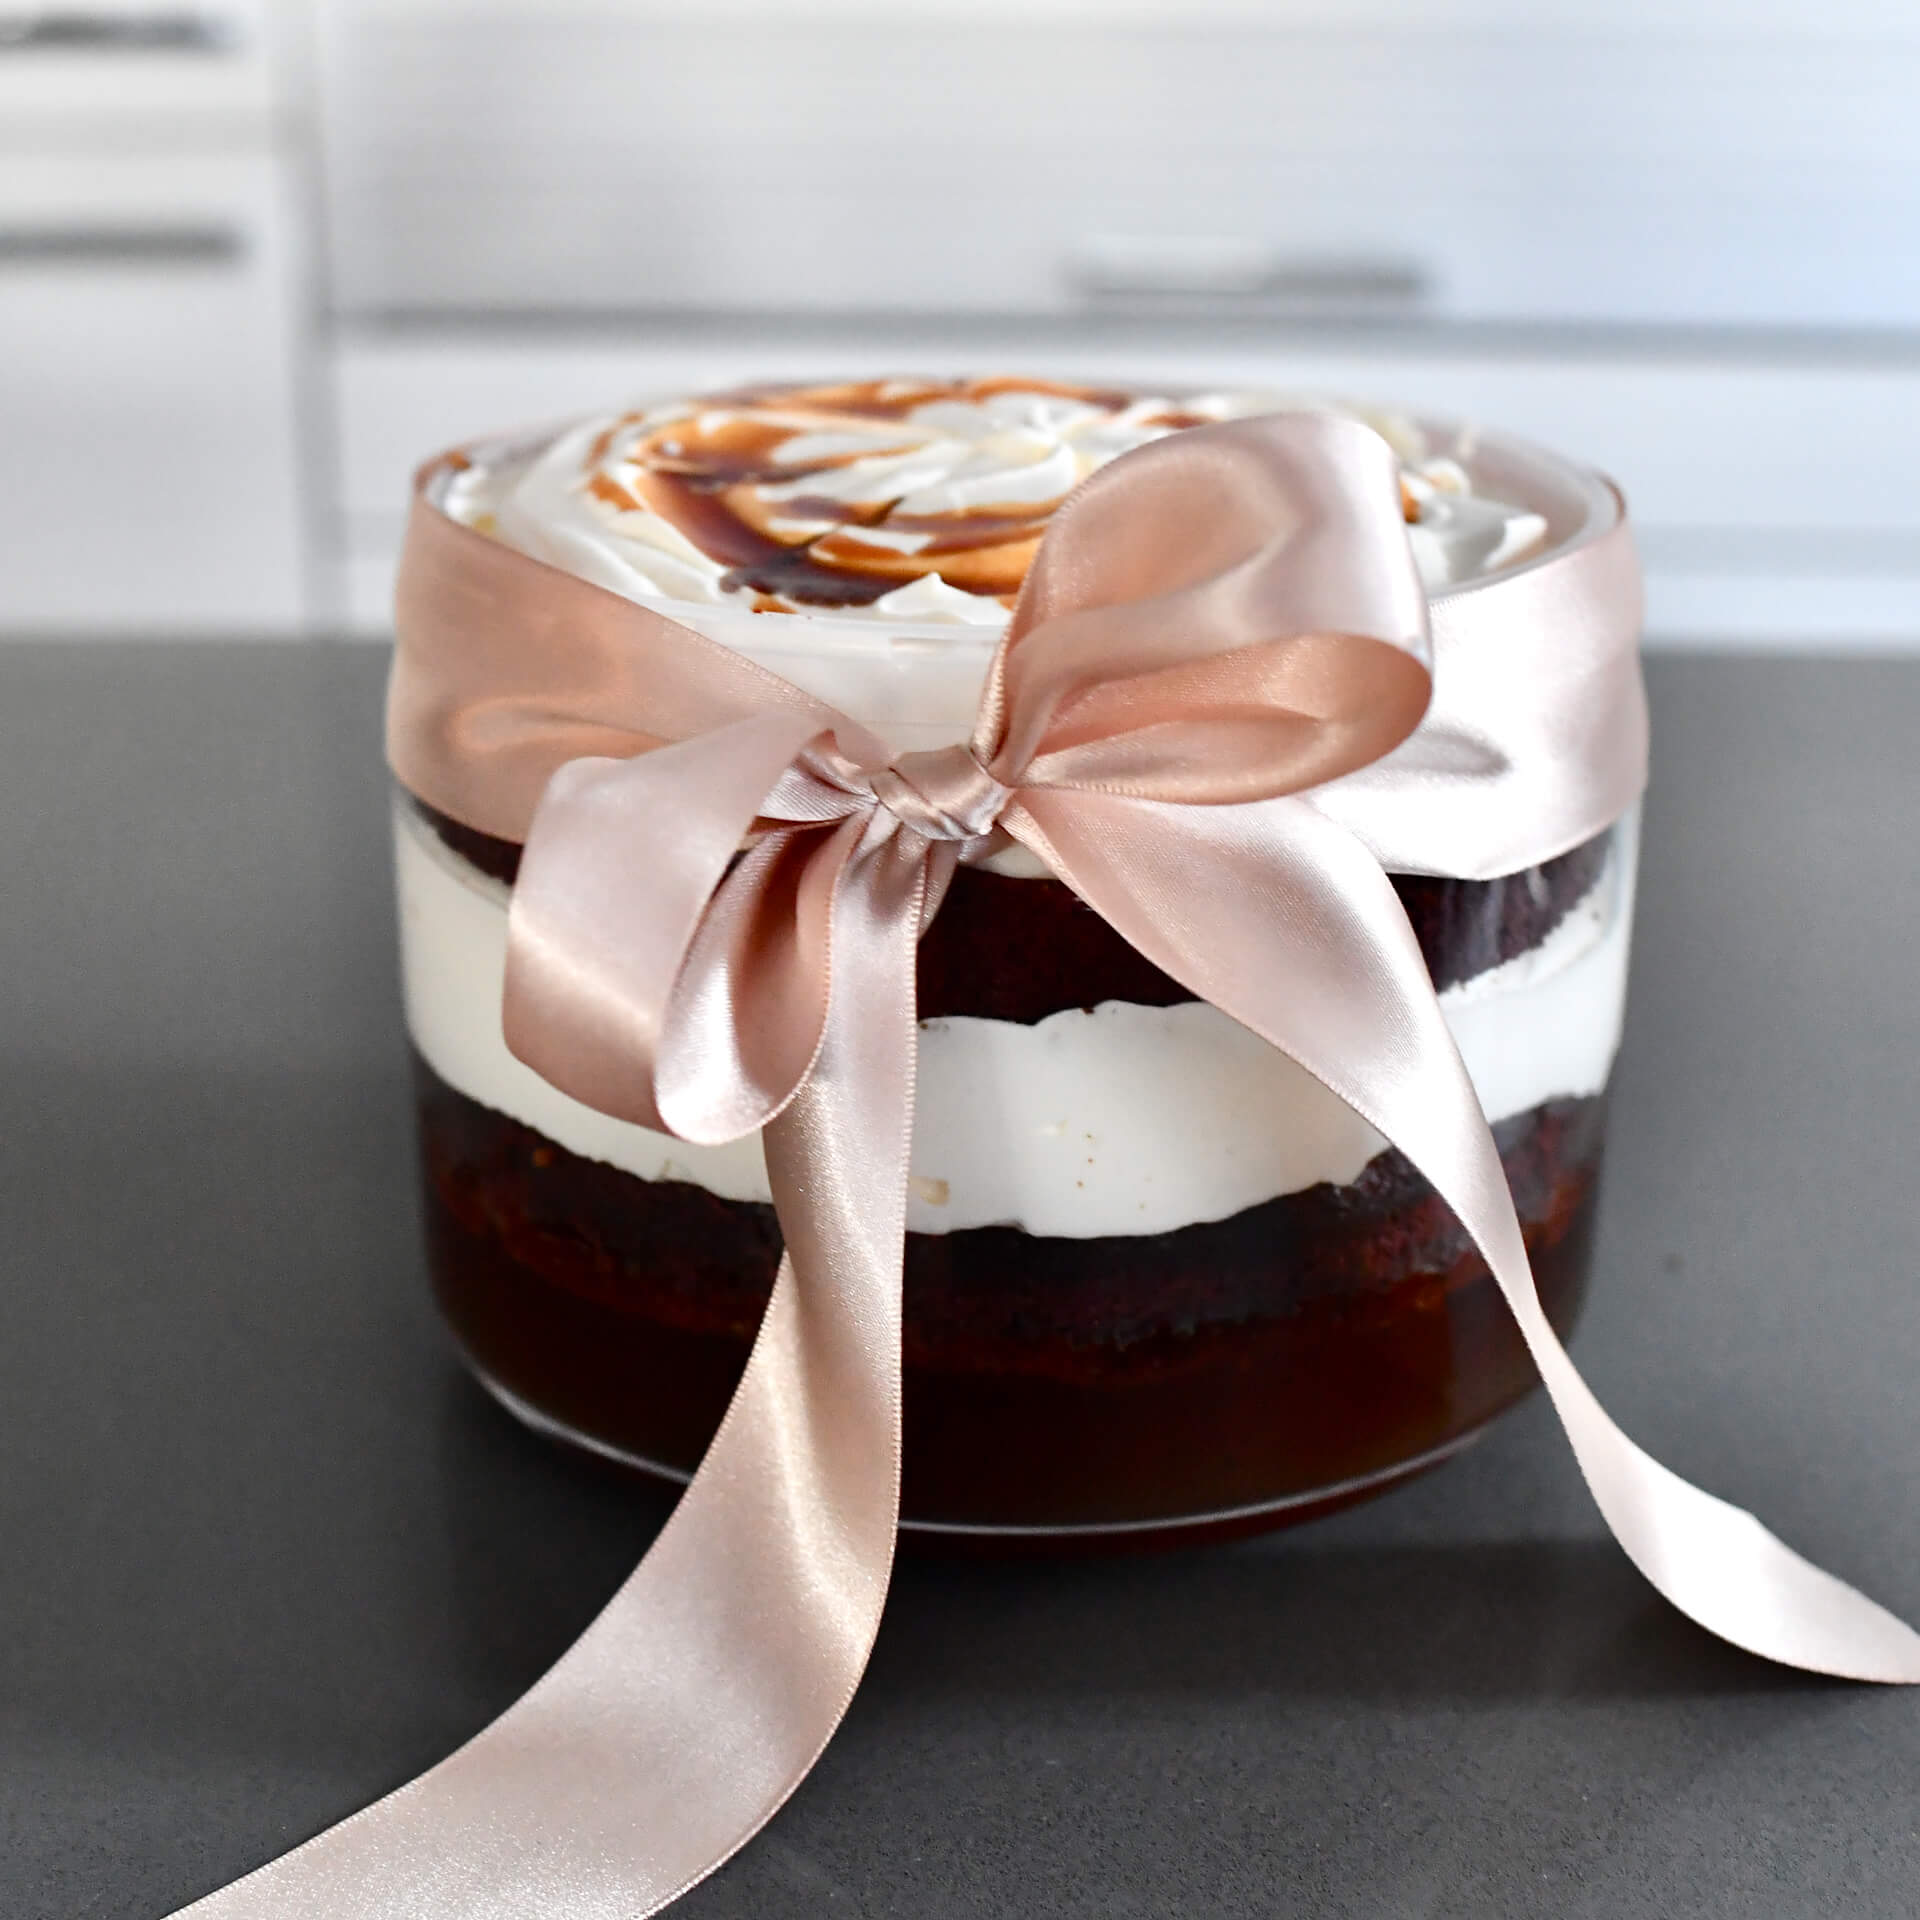 New Years Eve - Gingerbread, Sherry and Caramel Trifle